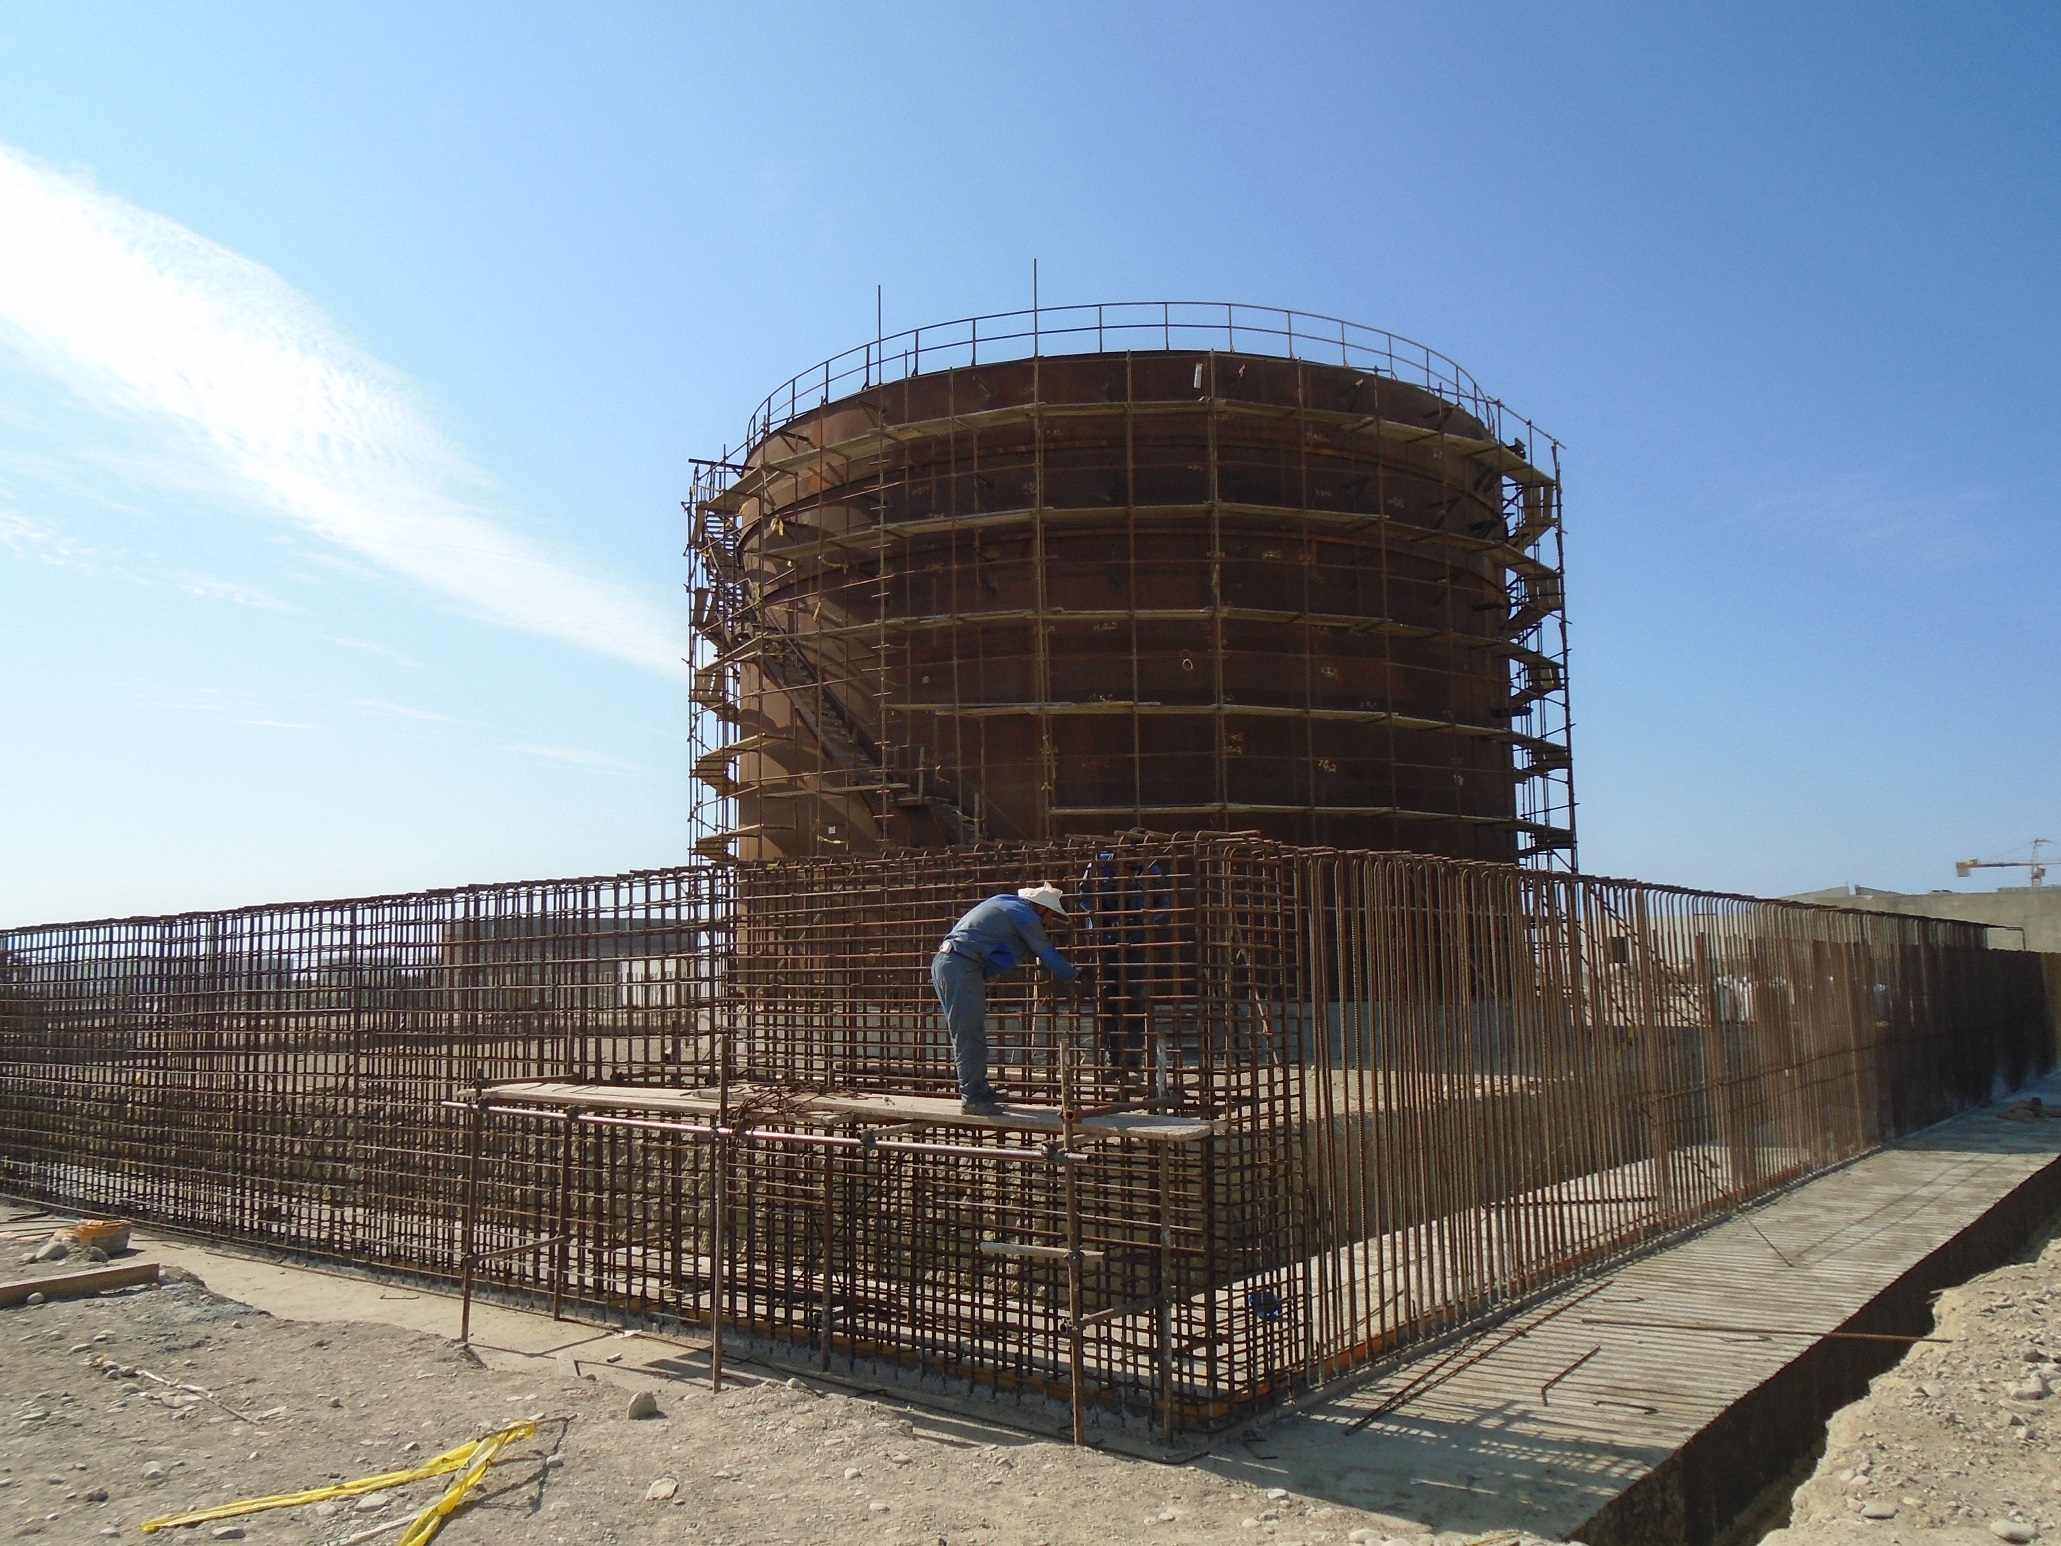 Monthly storage tank of Jask crude oil power plant